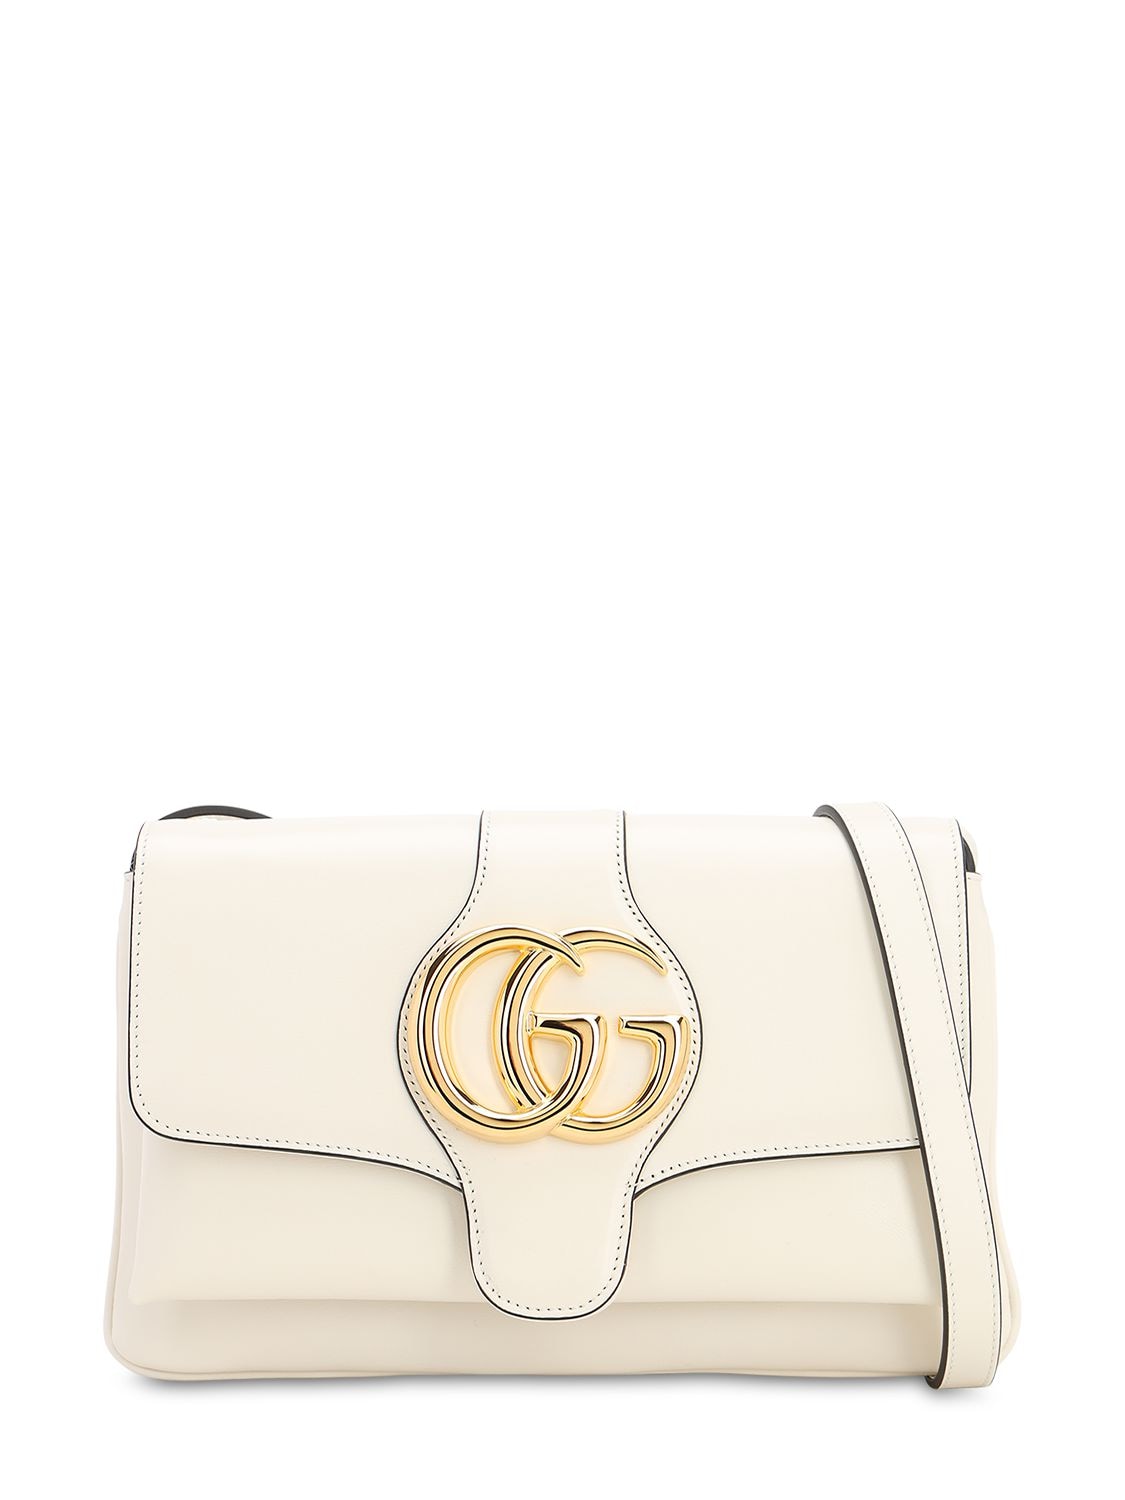 Gucci Small Arli Smooth Leather Shoulder Bag In Mystic White